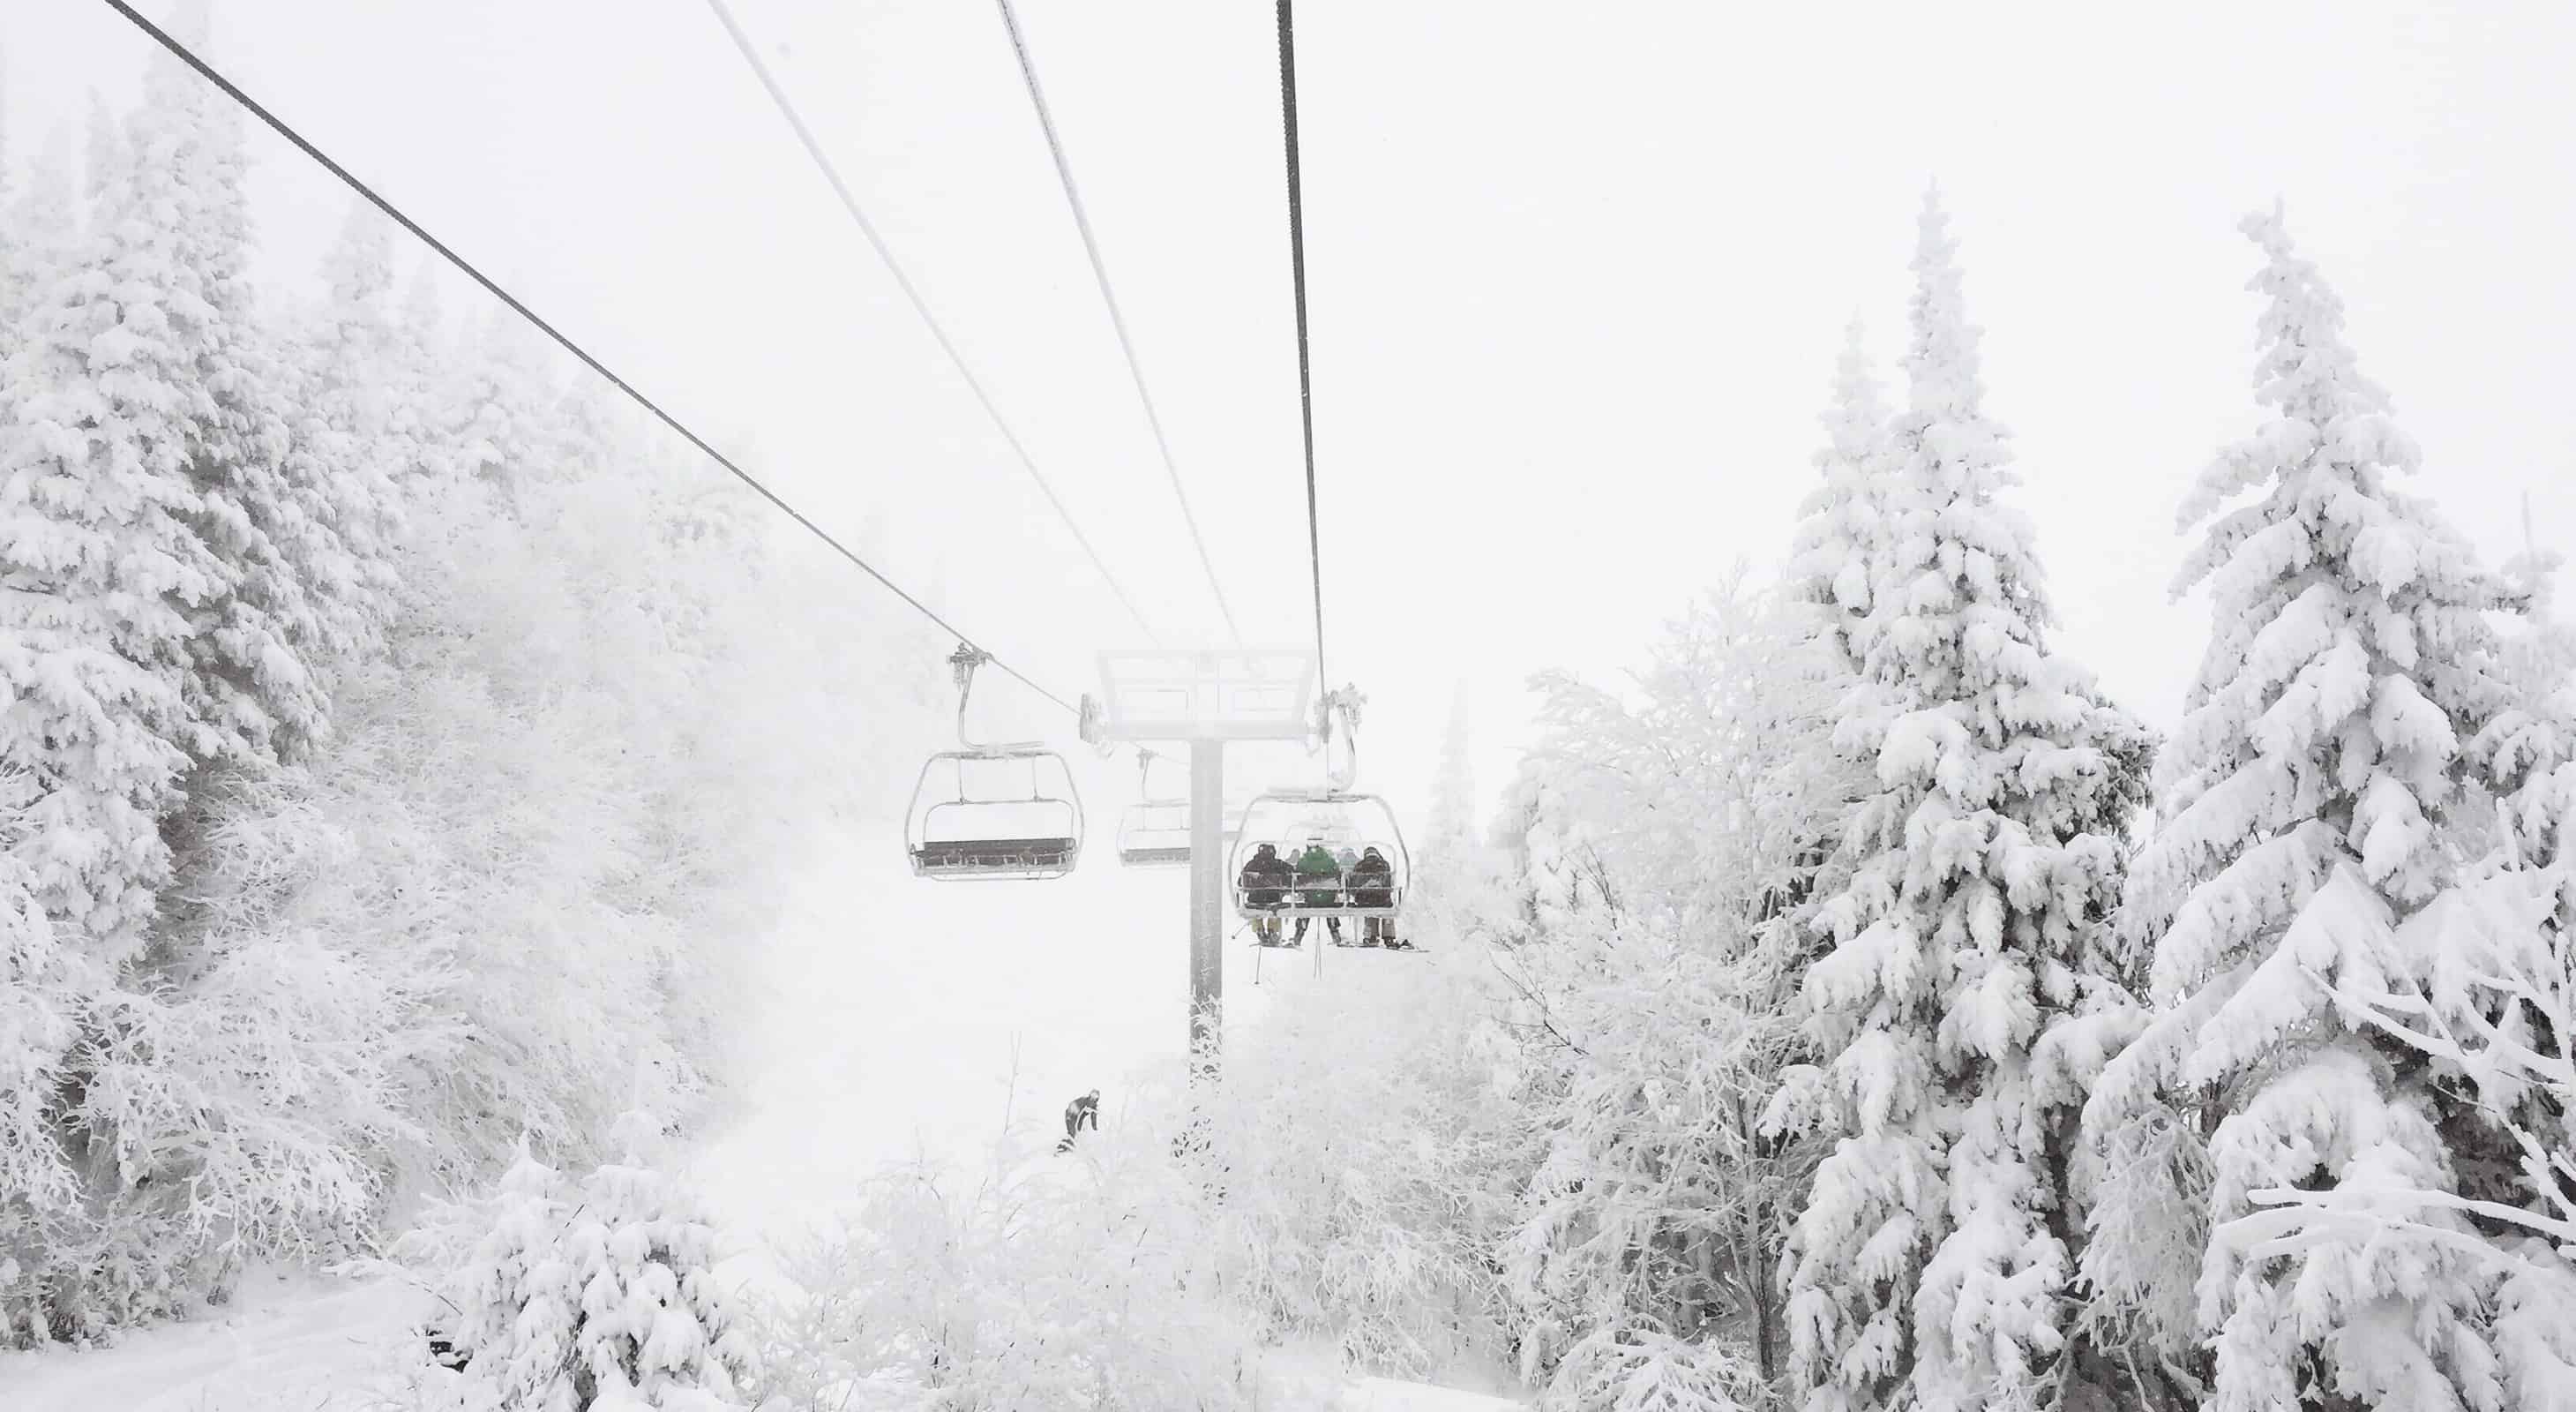 Chairlift in the winter